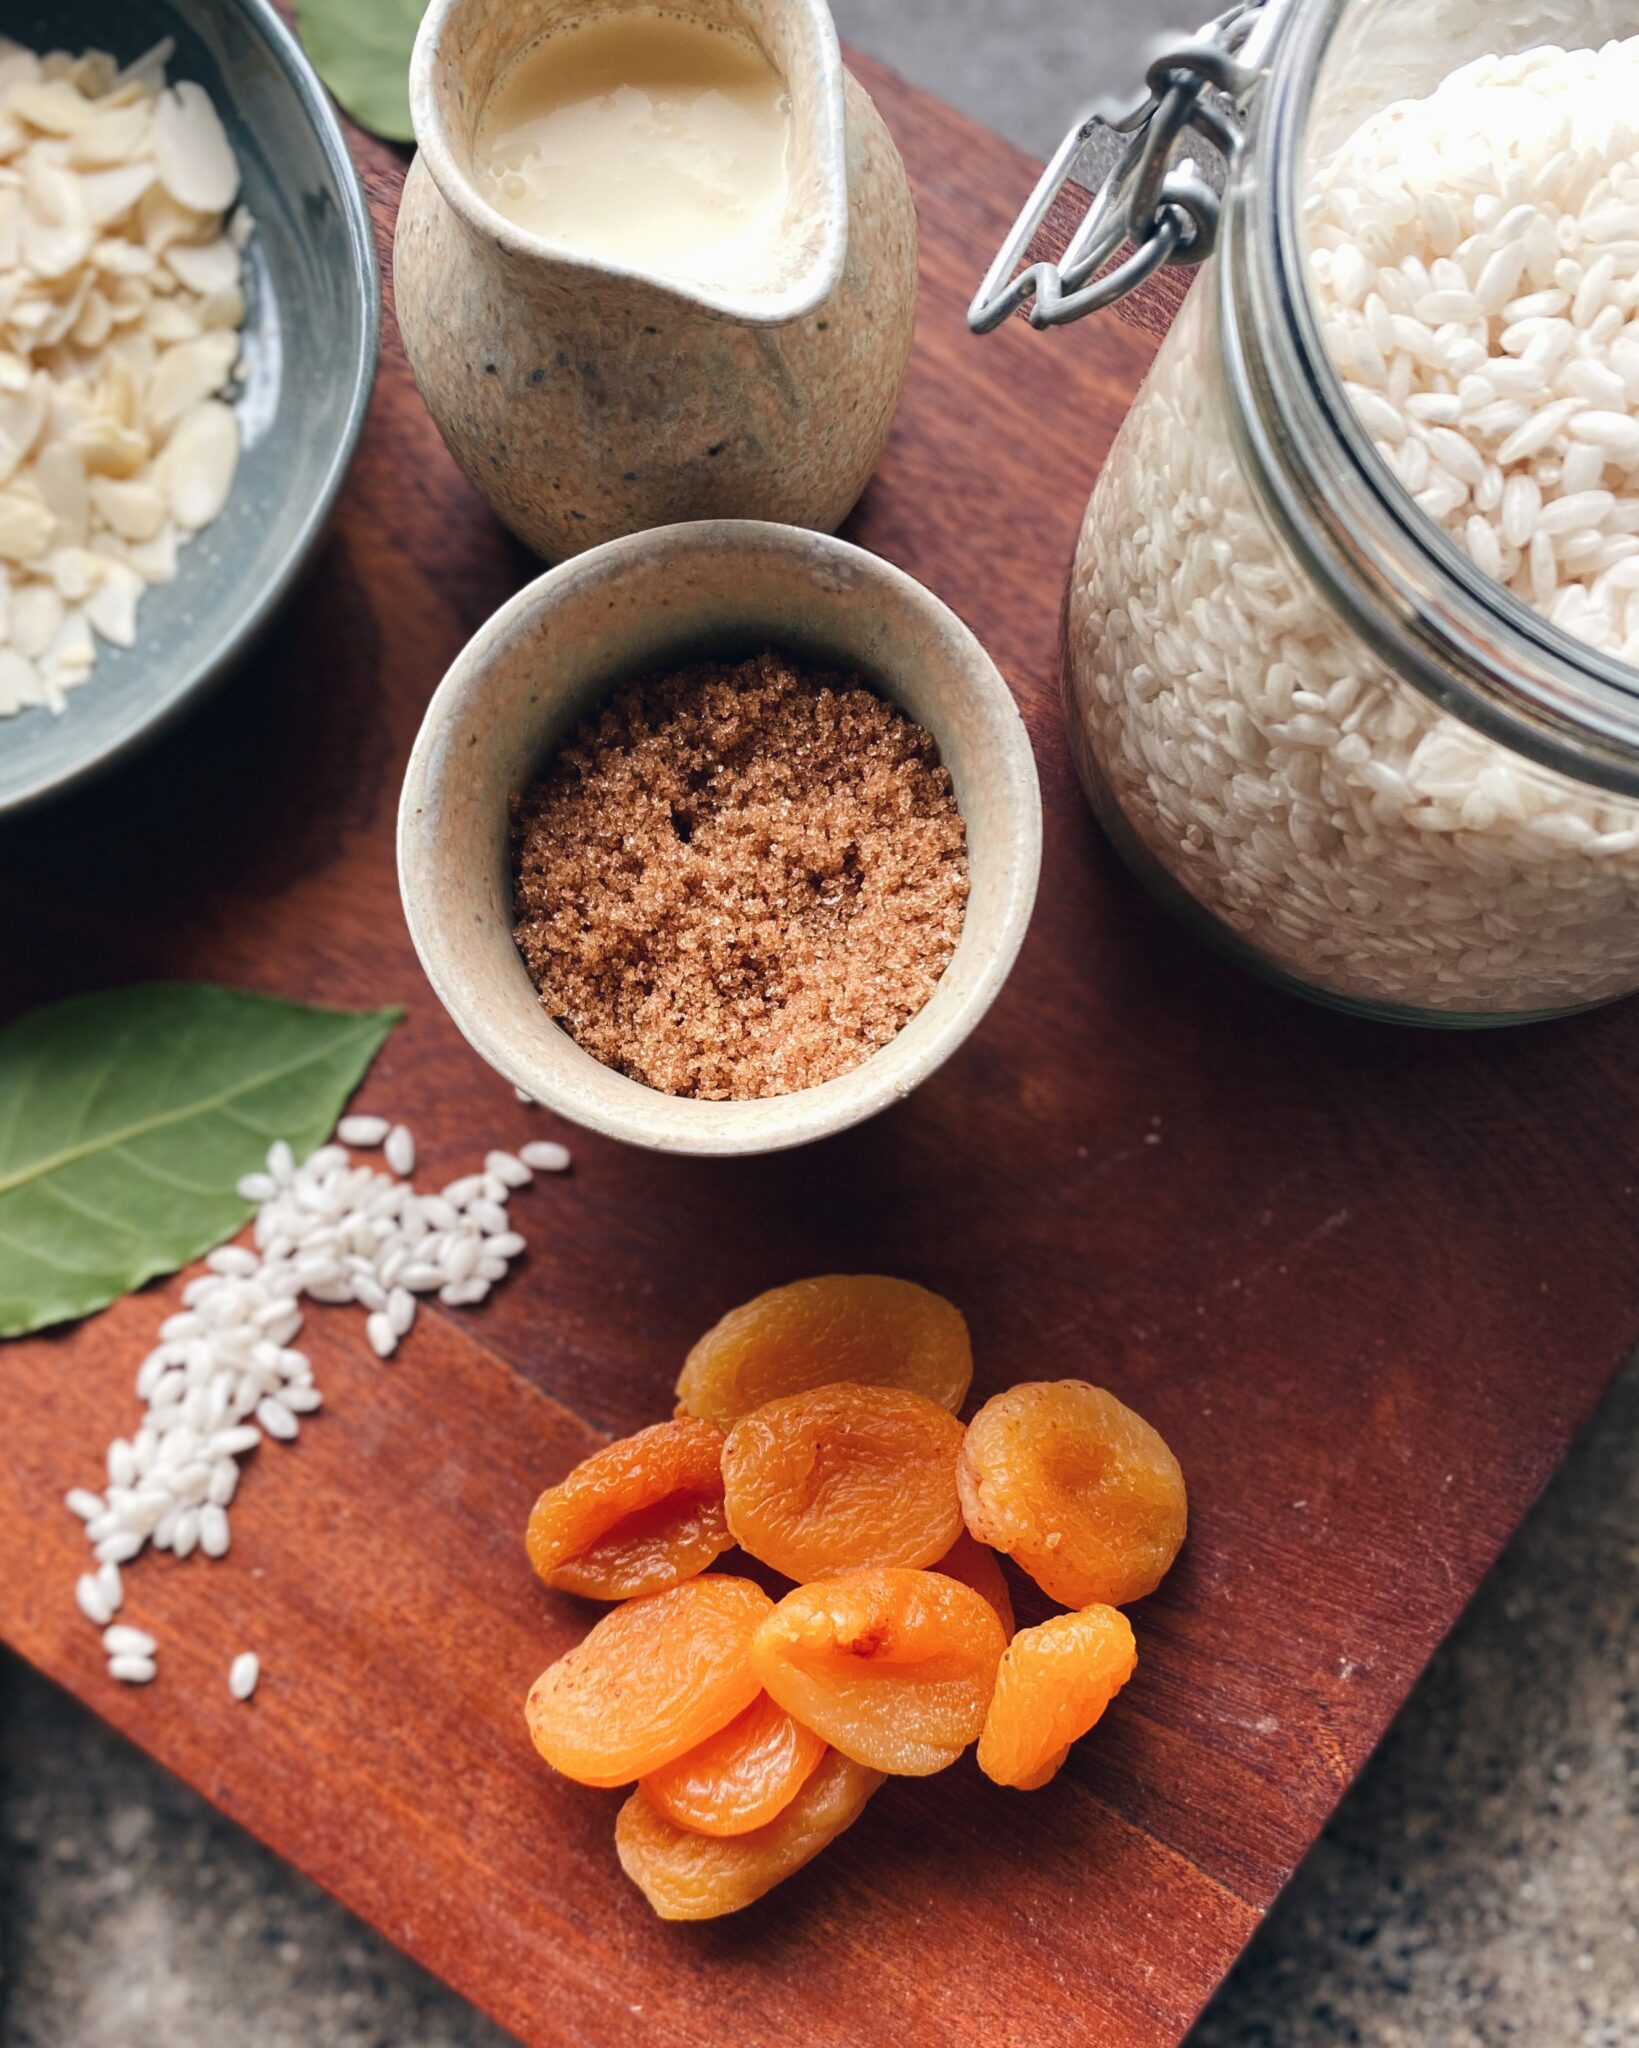 Photo of completed recipe for Apricot Rice Pudding with Almonds